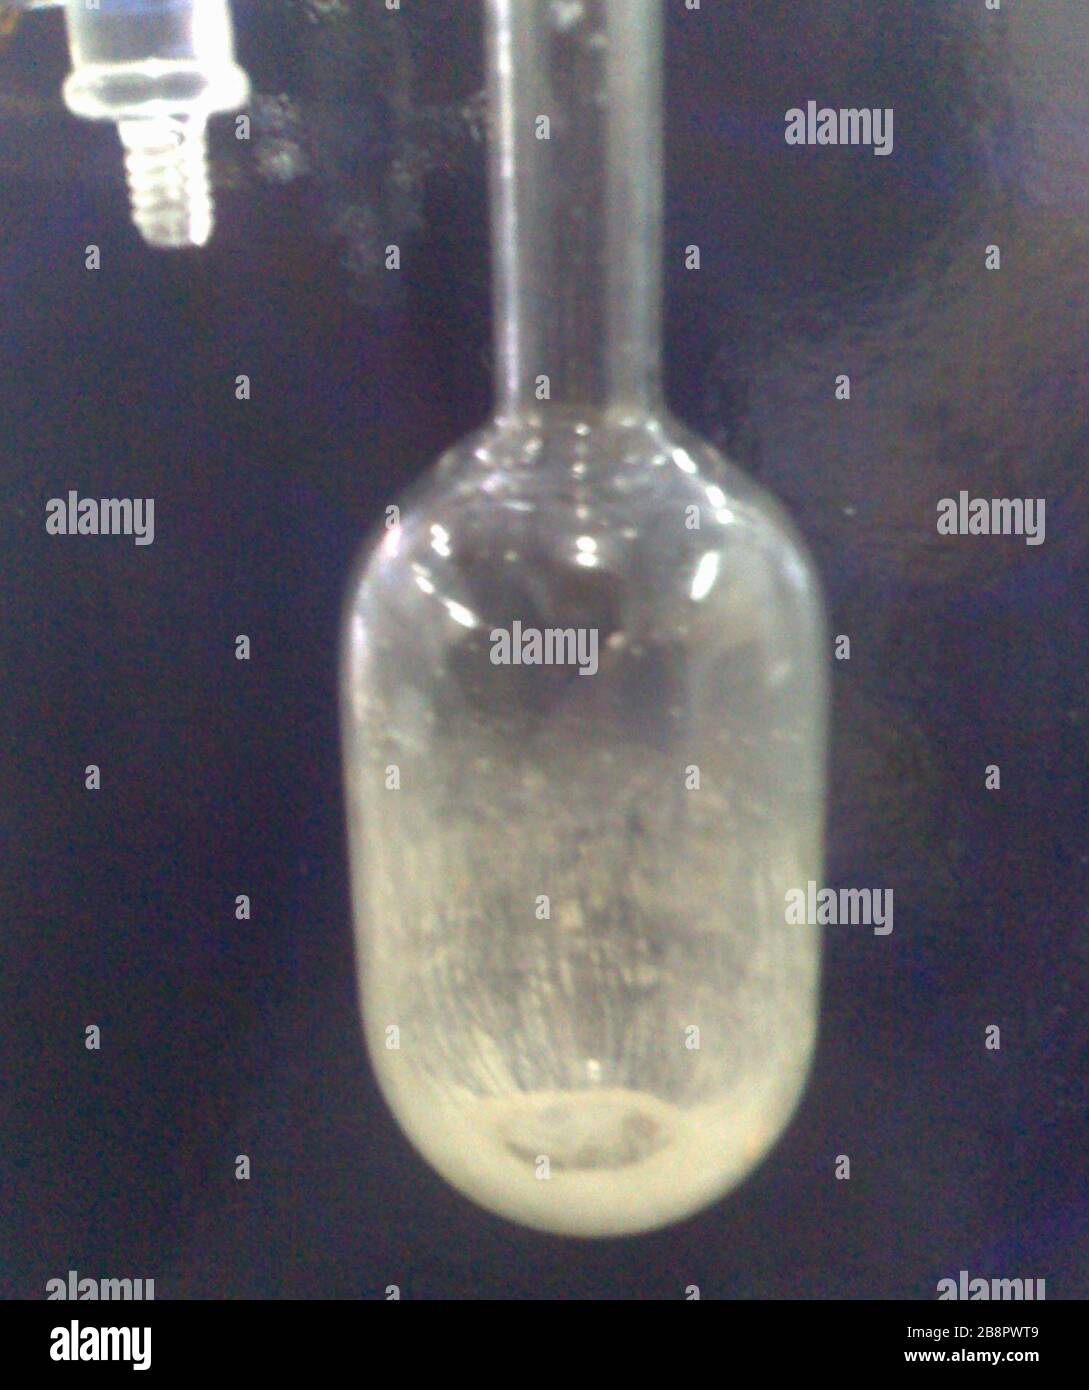 English: 1,3-dimesitylimidazol-2-ylidene in a Schlenk flask; 28 April 2008  (original upload date); Transferred from en.wikipedia to Commons by  omegakent.; Freestyle-69 at English Wikipedia Stock Photo - Alamy